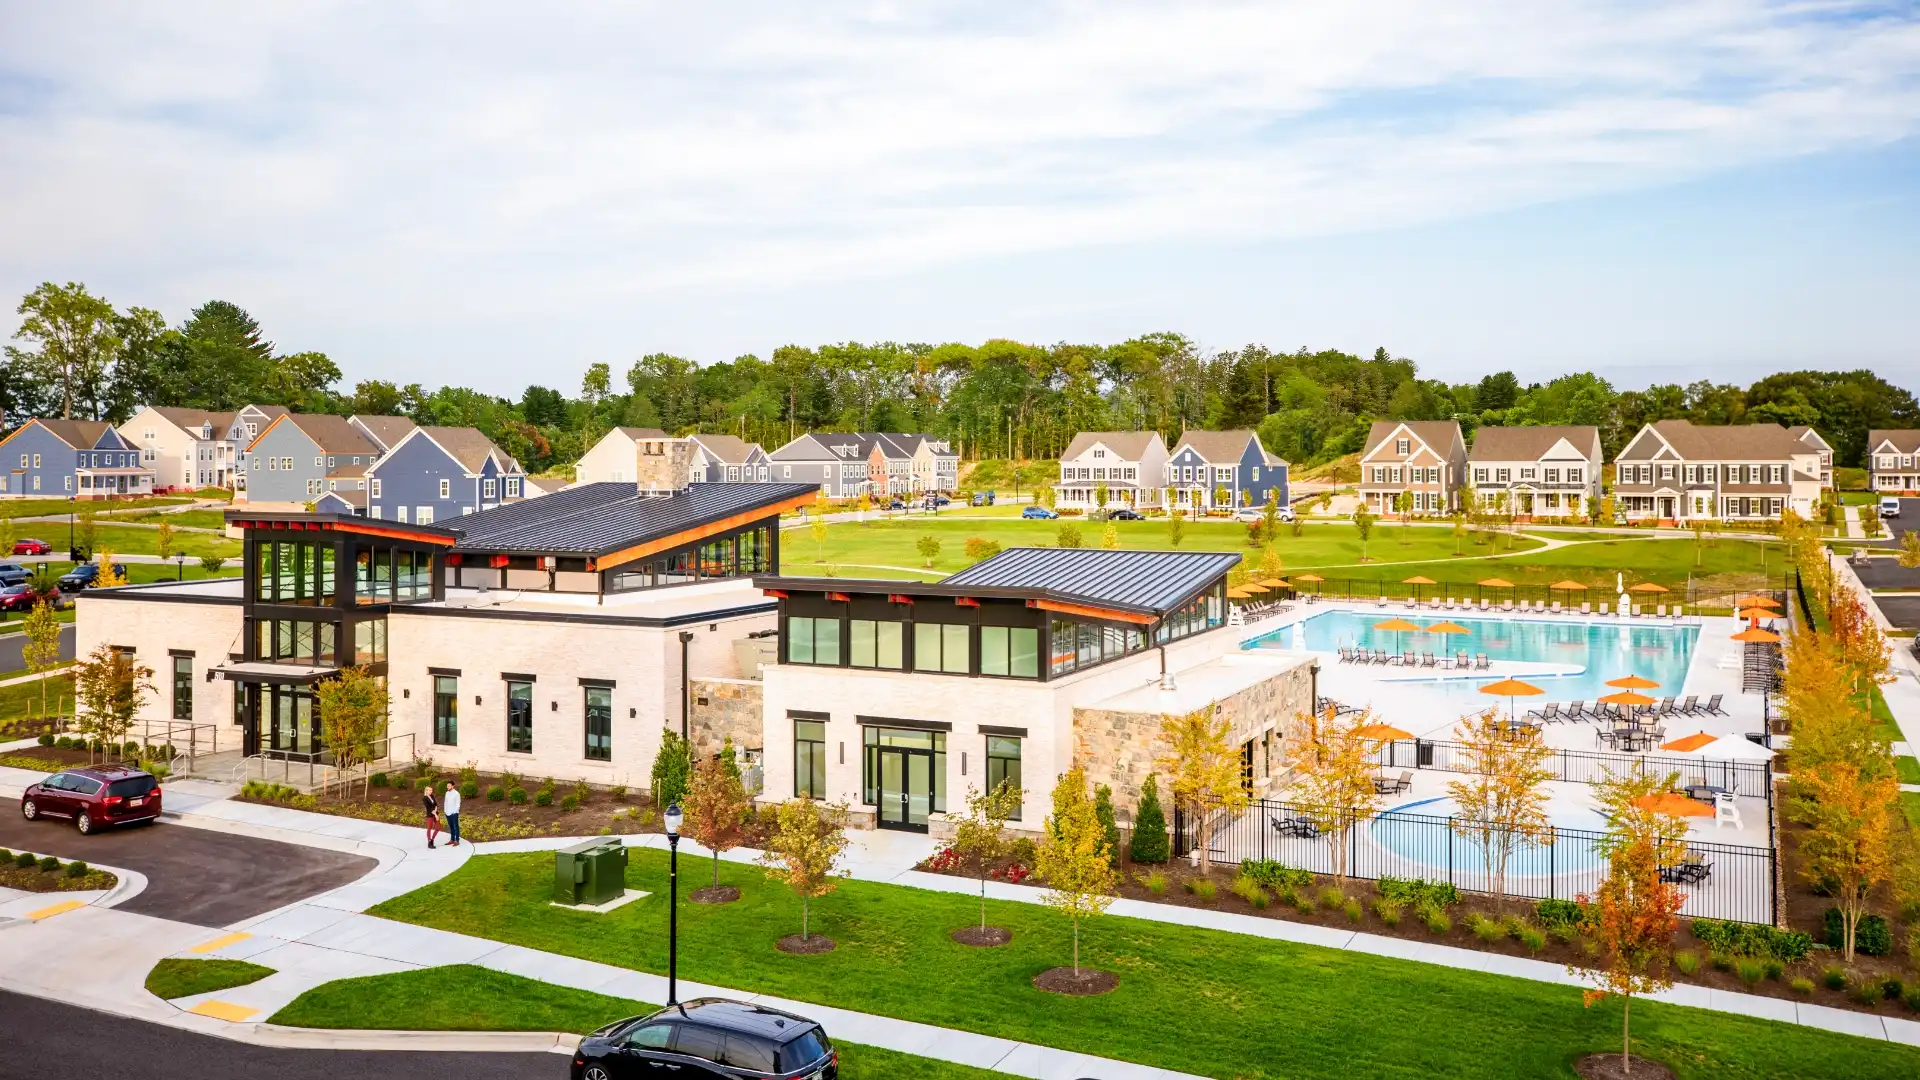 Greenleigh community clubhouse, pool and single-family homes